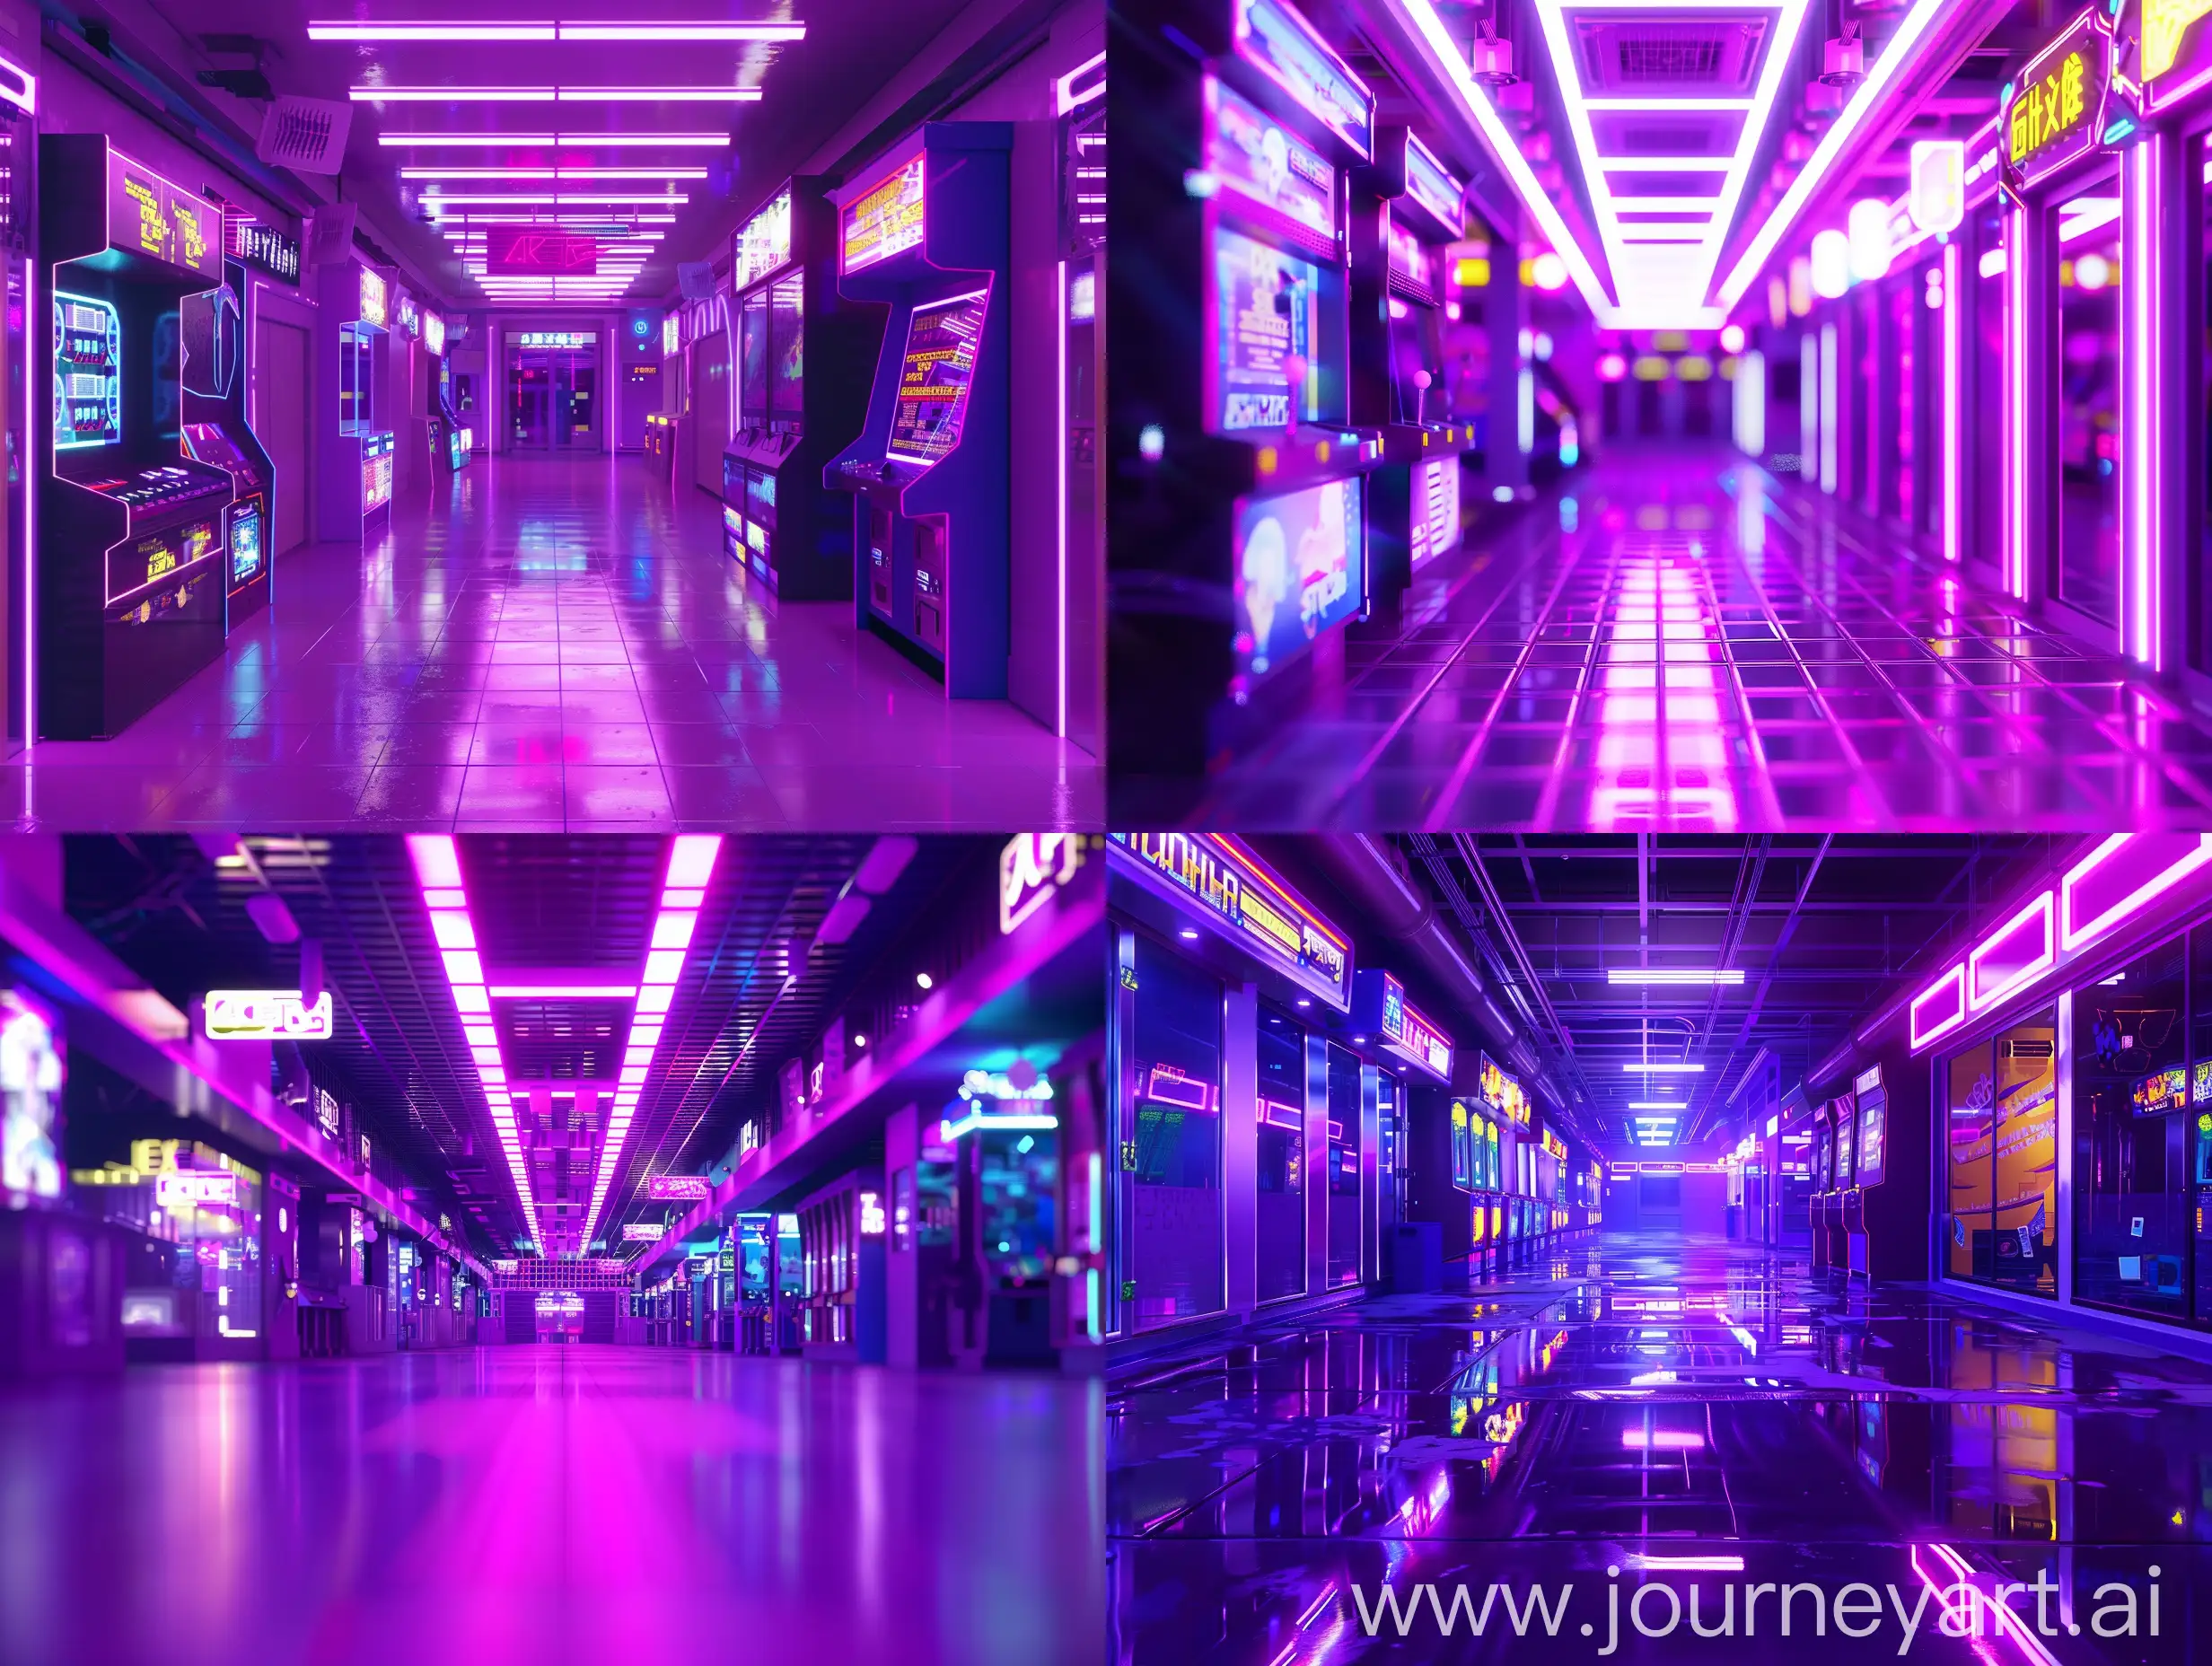 purple background it's just the background of it, neon, 4K, high quality, artistic, high definition, anime style, futuristic, cyperpunk, indoors arcade setting, bokeh, glowy, floor view, top down view 160 angle